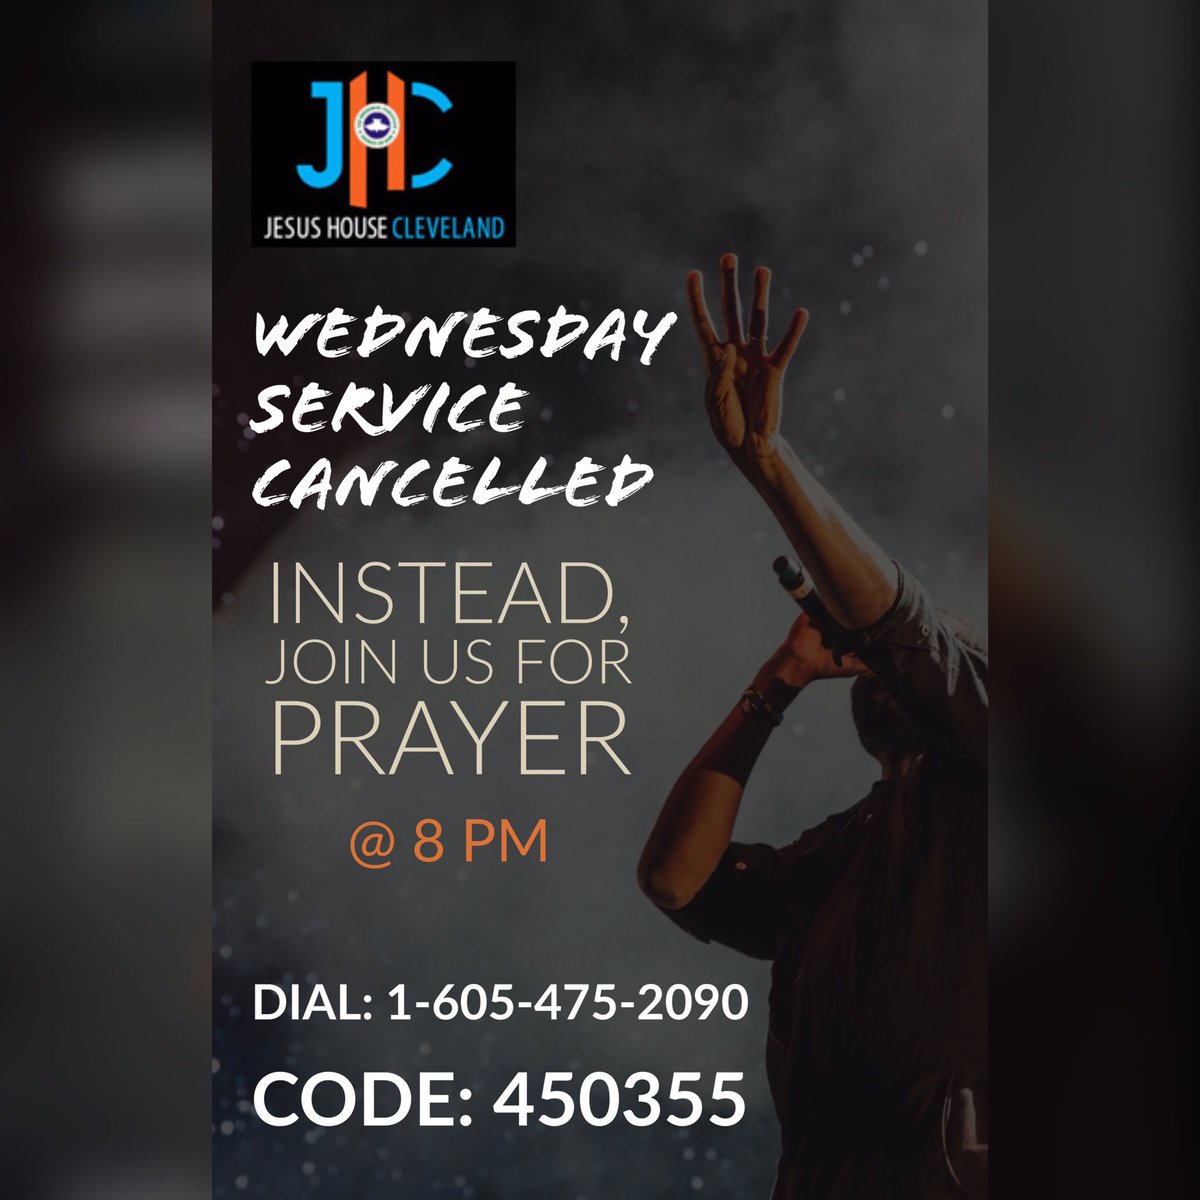 Please join us tonight and every night this week at 8 P.M. to intercede for the world. 
May the mercy of God prevail! 

#prayerwithoutceasing